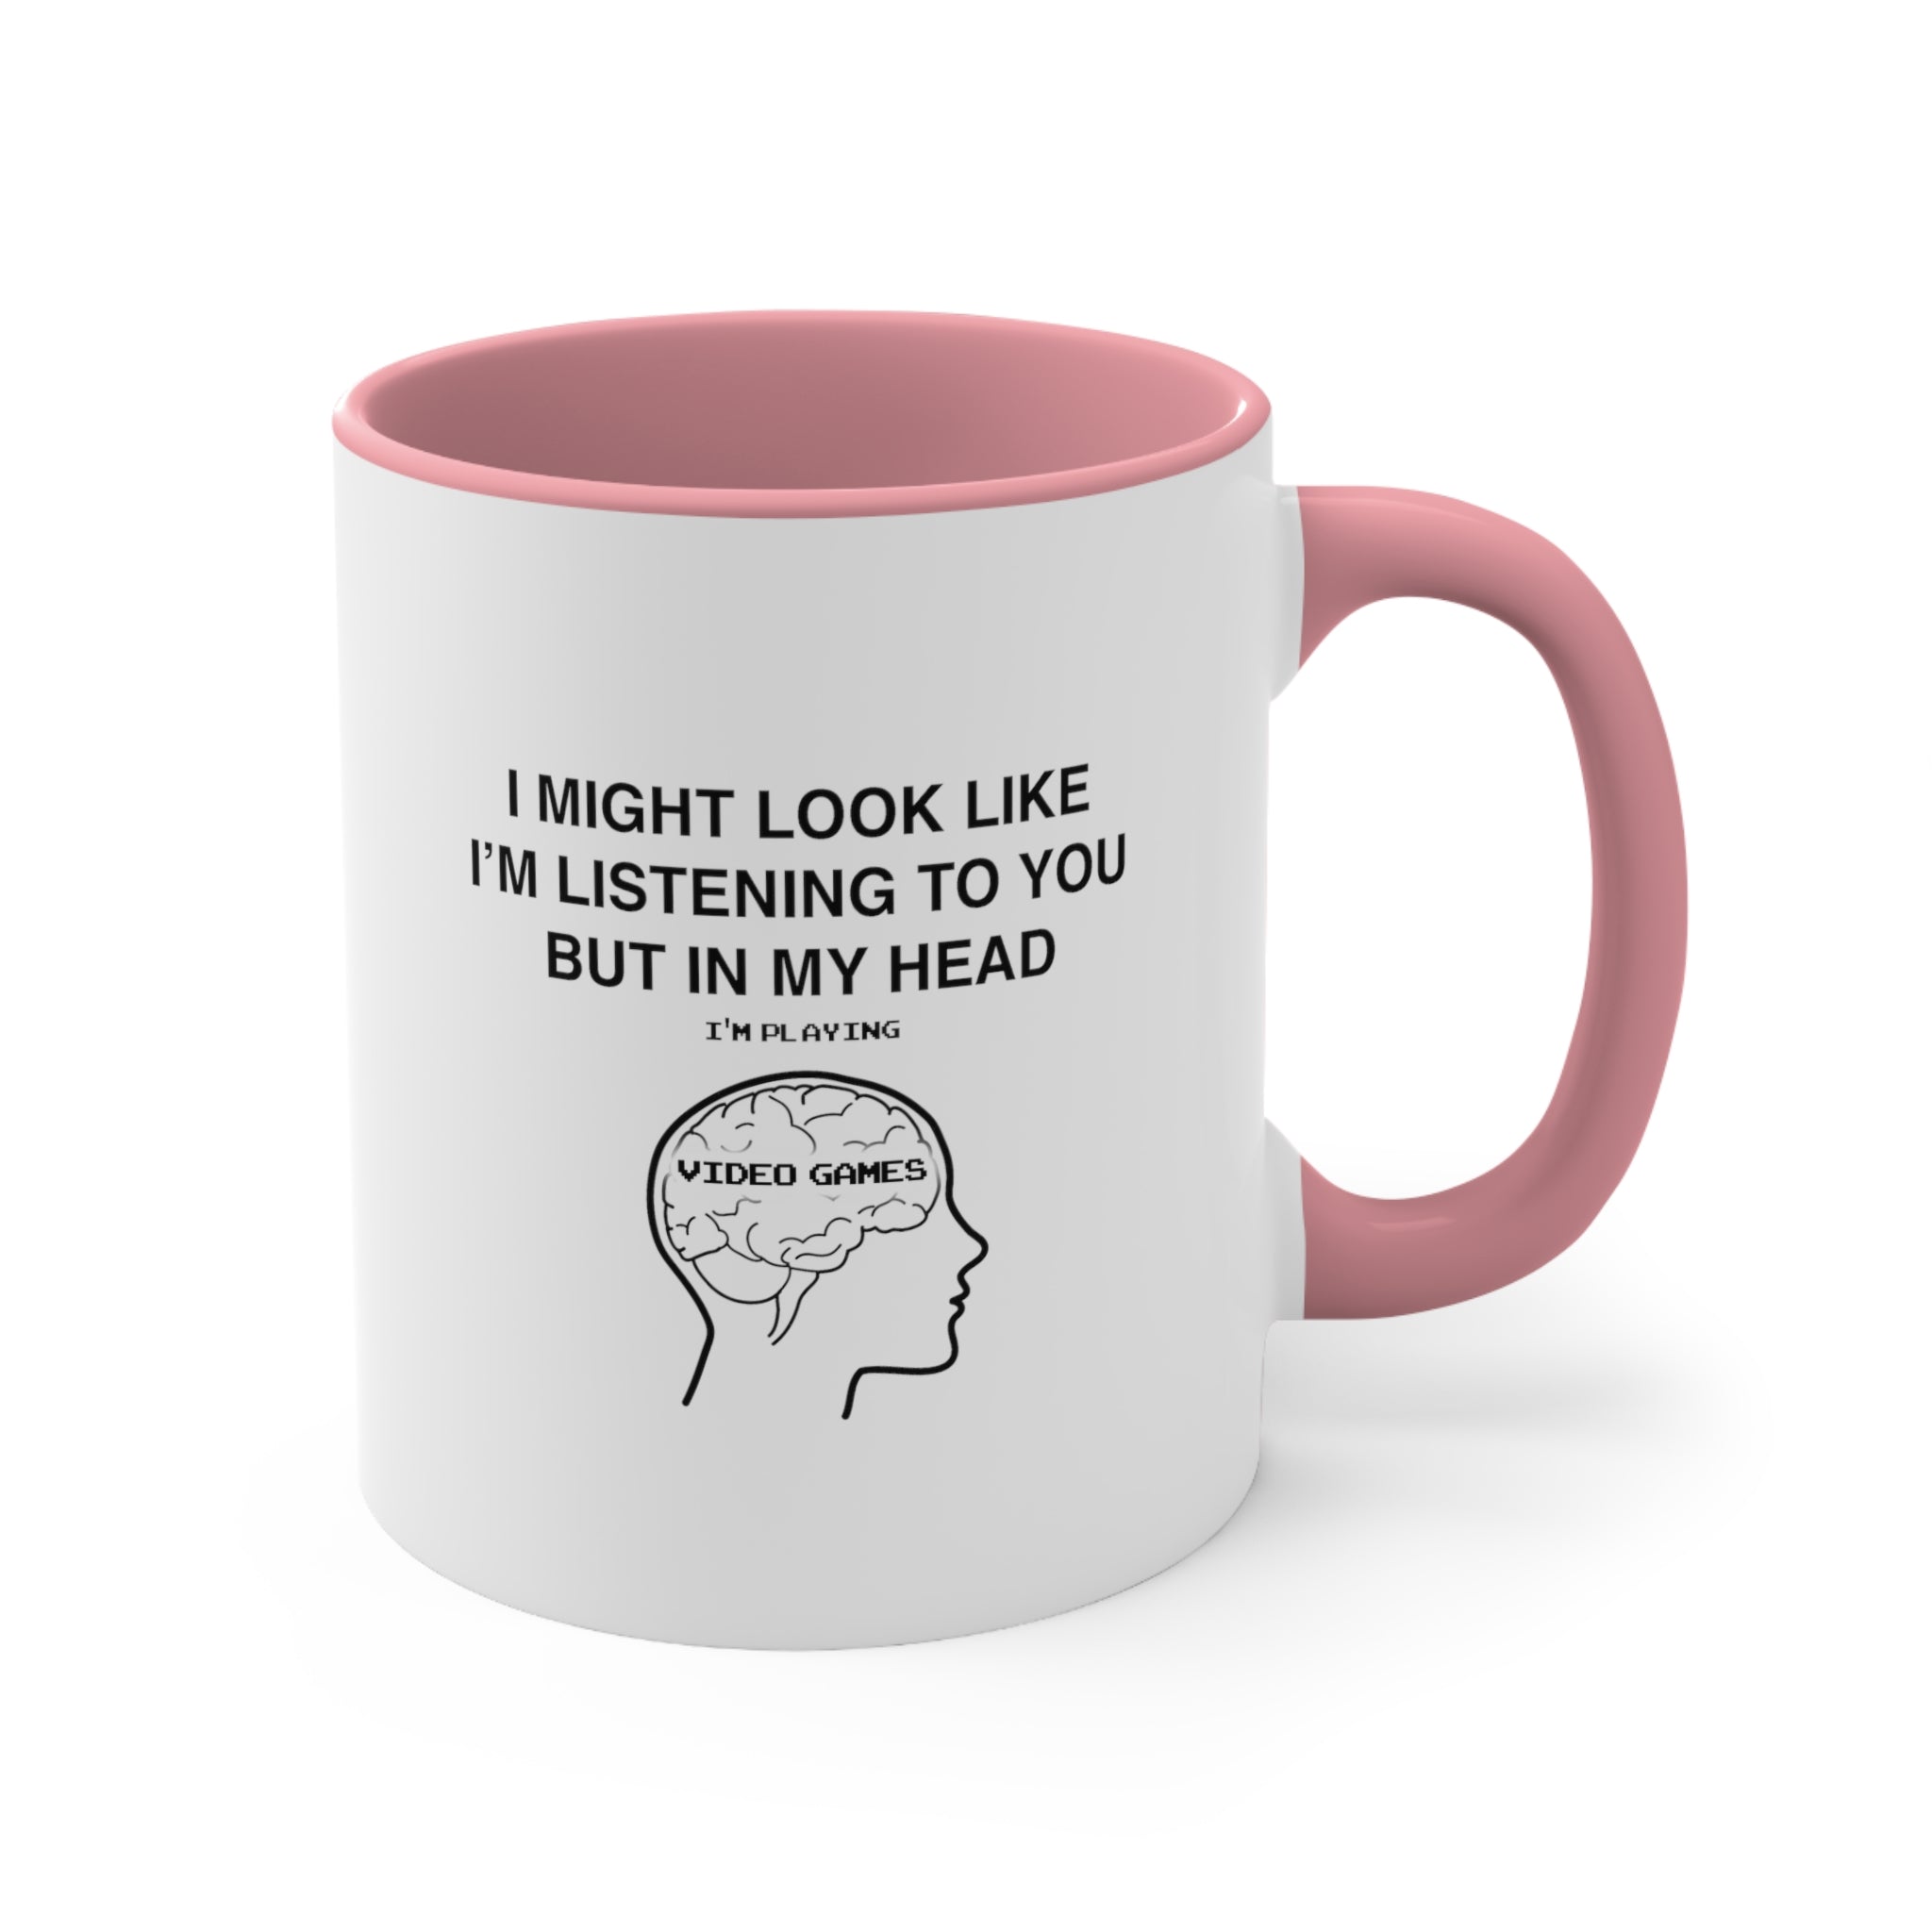 Video Games Funny Mug Coffee Mug, 11oz I Might Look Like I'm Listening To You But In My Head I'm Playing Video Games